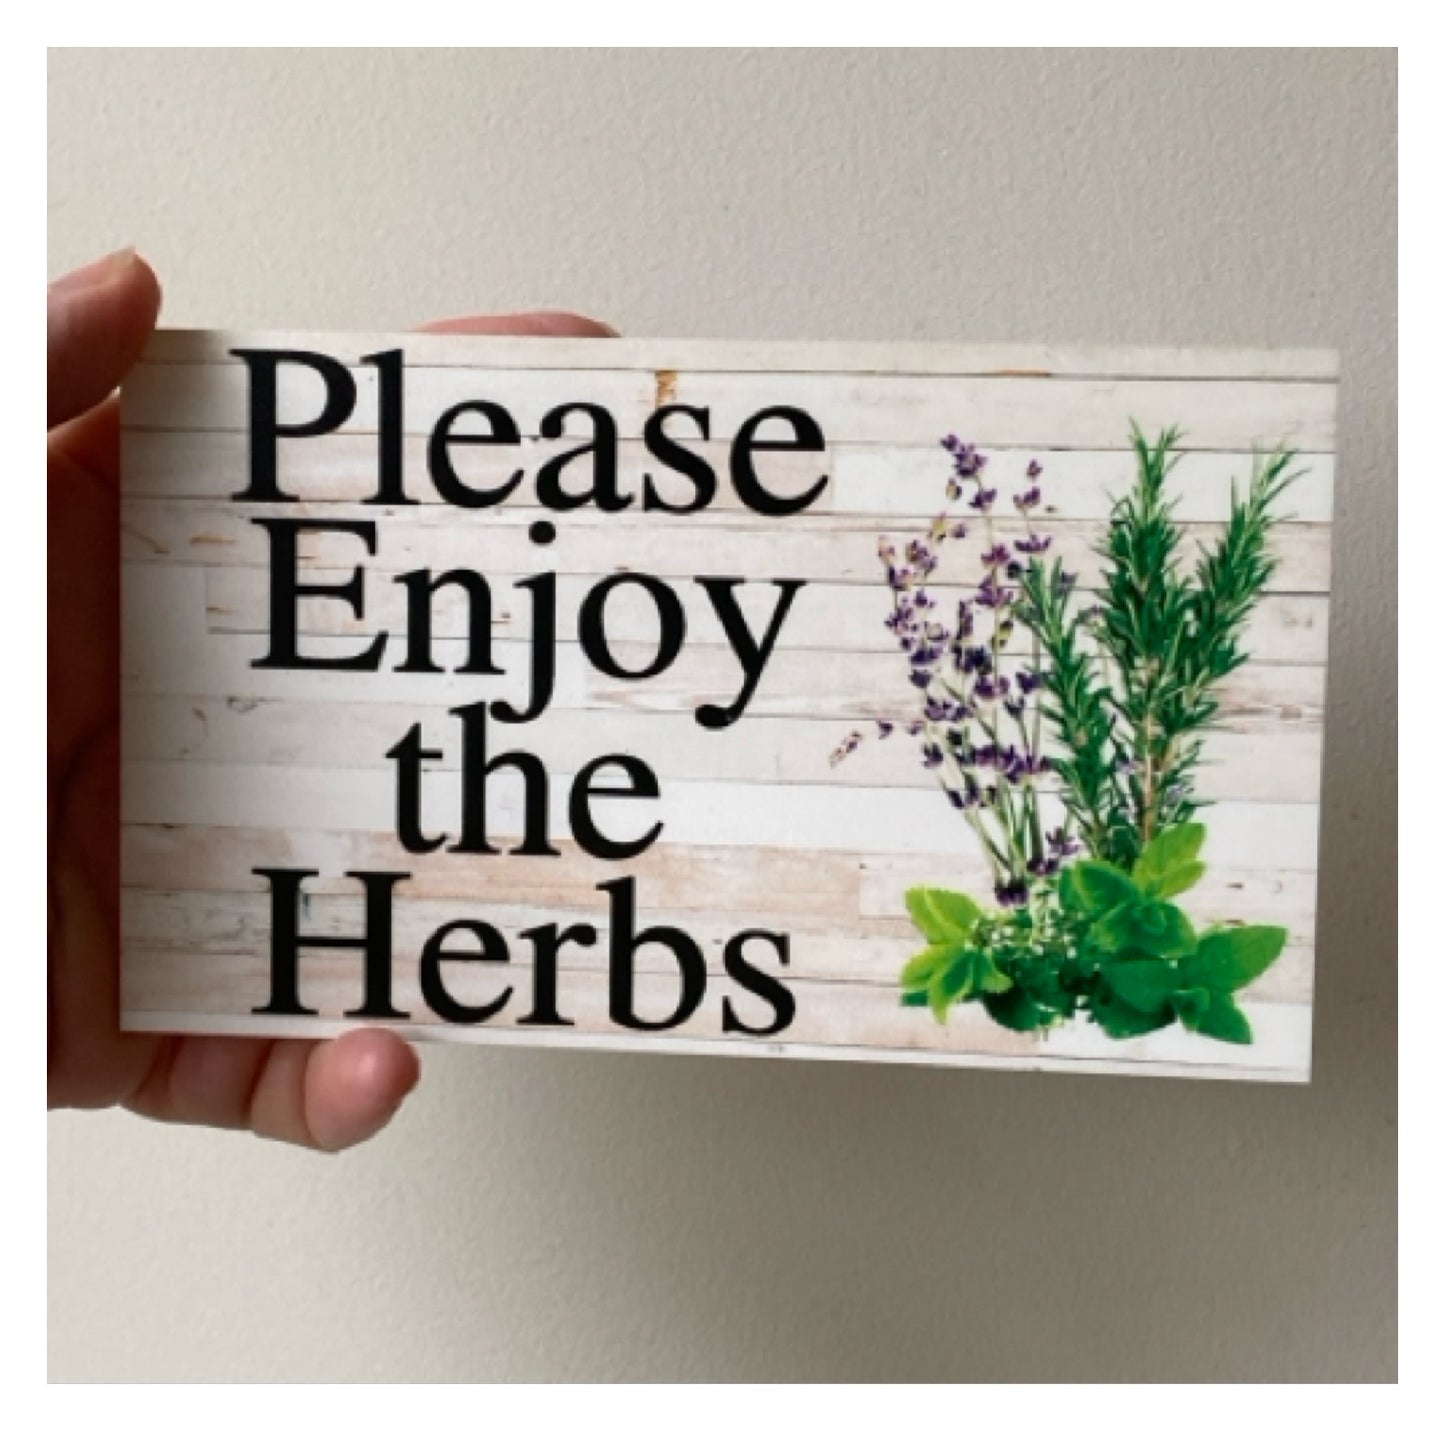 Herb Herbs Garden Custom Personalised Sign - The Renmy Store Homewares & Gifts 